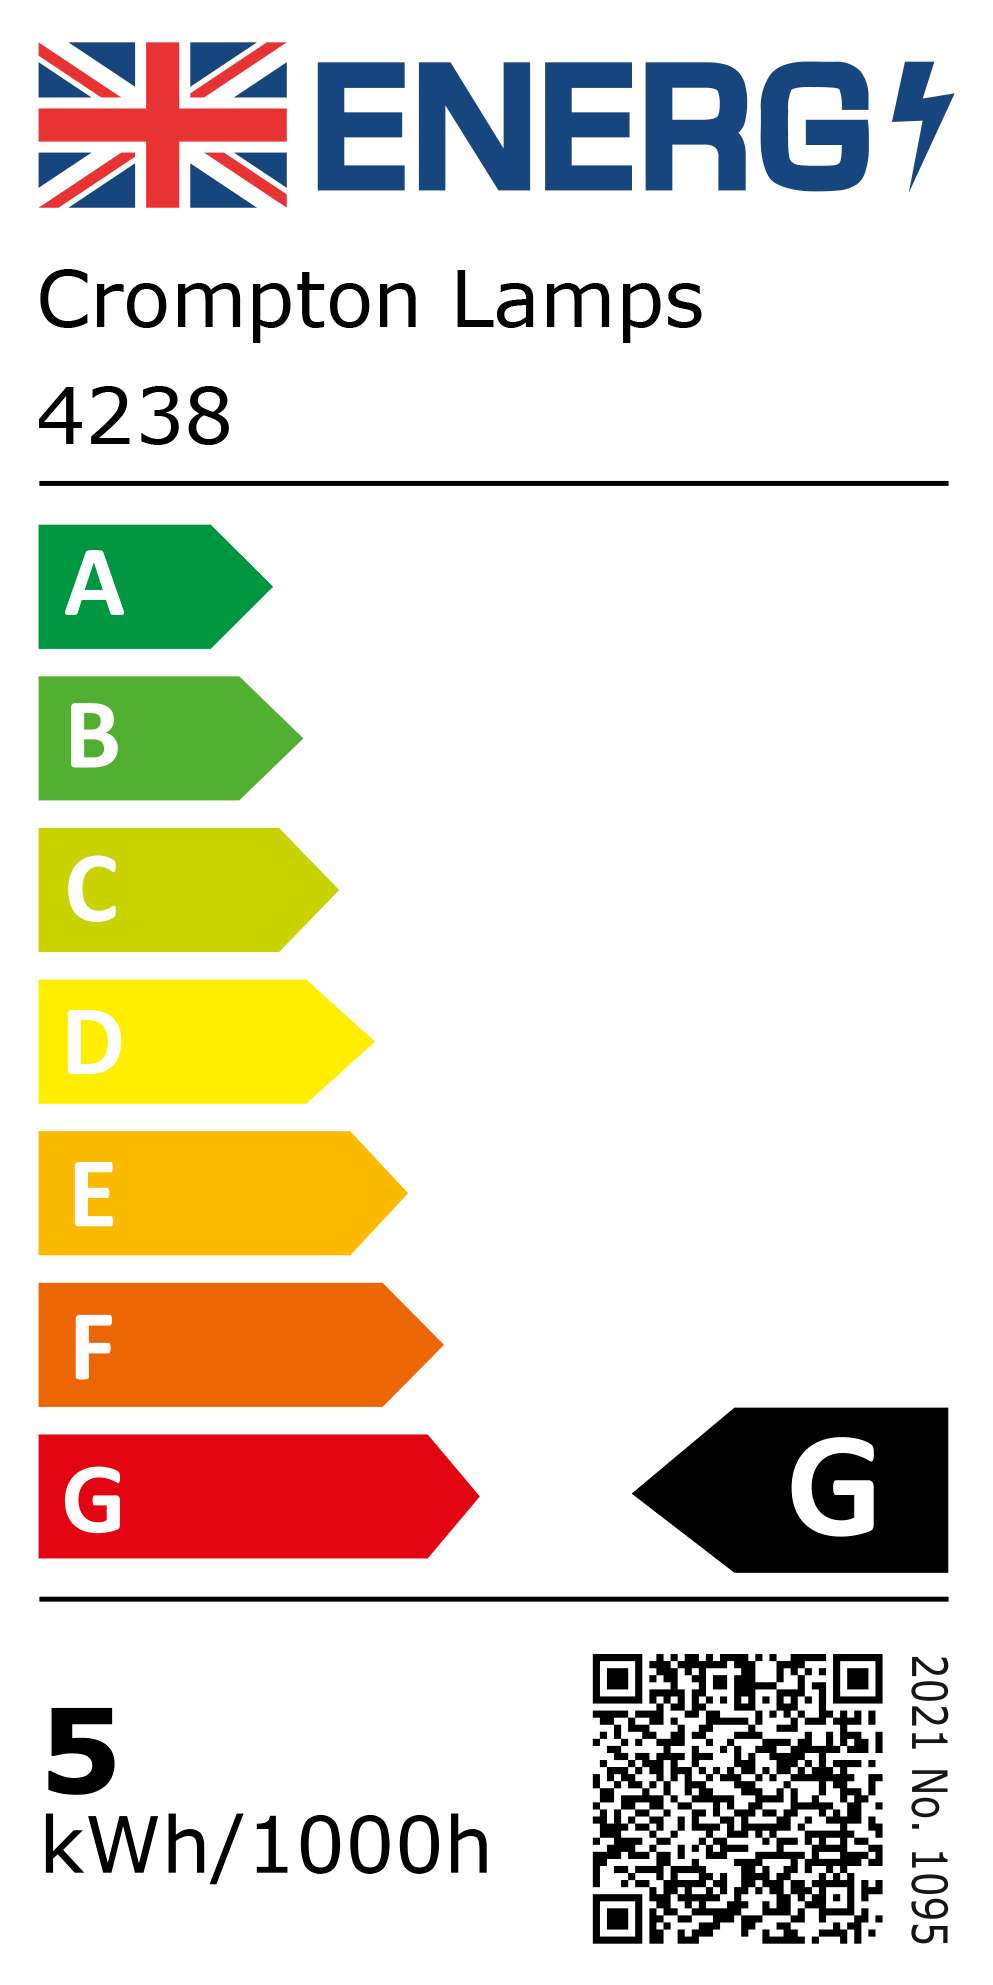 New 2021 Energy Rating Label: Stock Code 4238